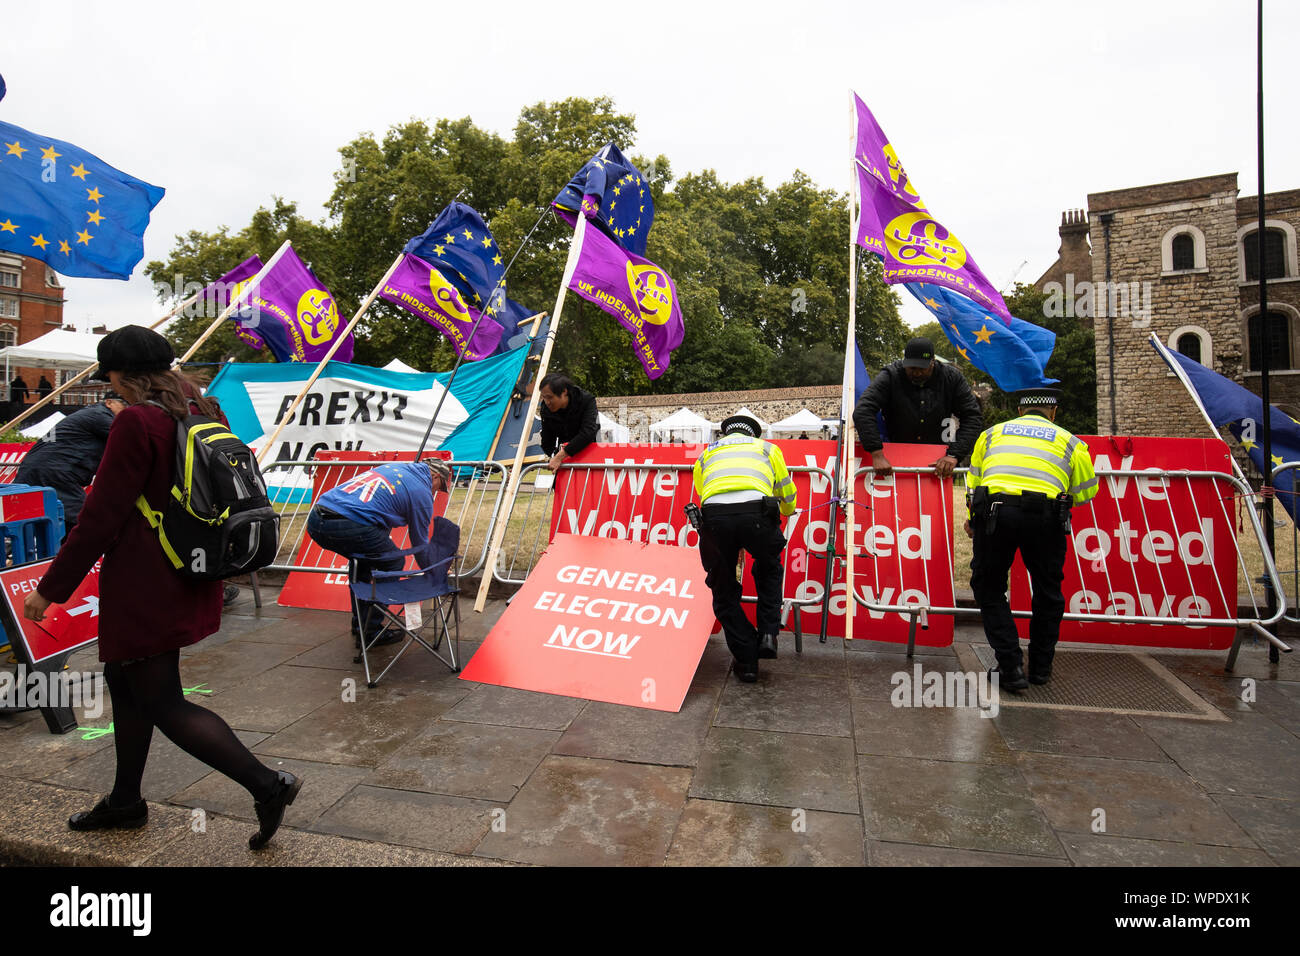 A lull in the protests as fences holding up signs and flags for Remain and Leave topple over in the wind on College Green in Westminster, London. Stock Photo